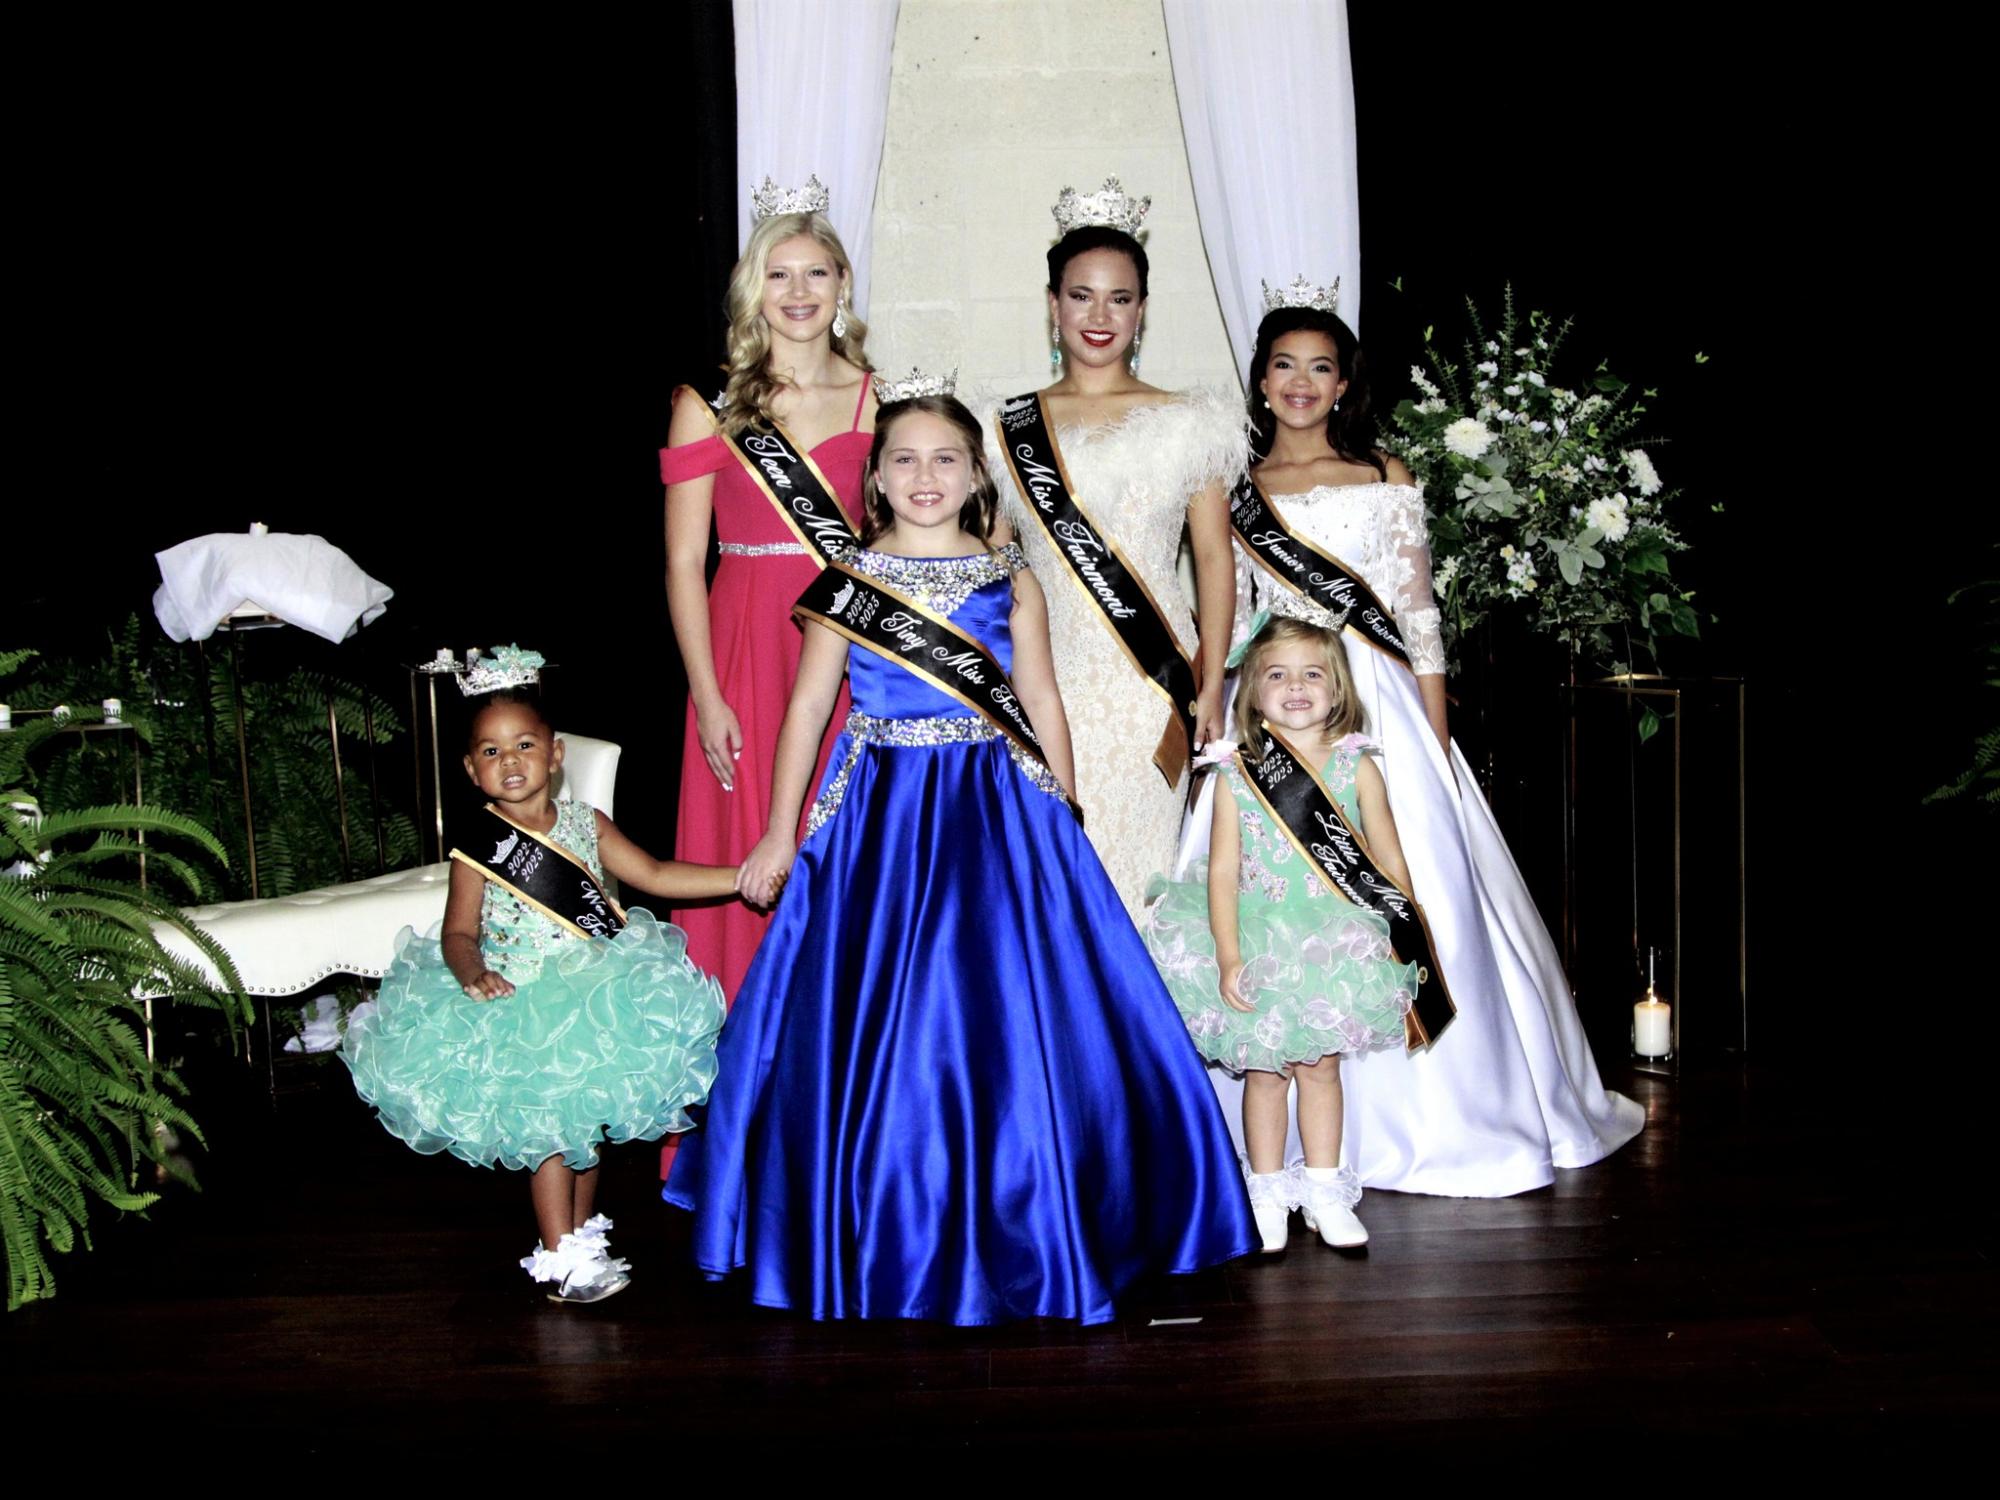 Front Row (L to R): Wee Miss Kiyah Hicks, Tiny Miss Avery Mace and Little Miss Presley Jackson. Back Row (L to R): Teen Miss Lauren Brown, Miss Kaylee Chavis and Junior Miss Halona Locklear.